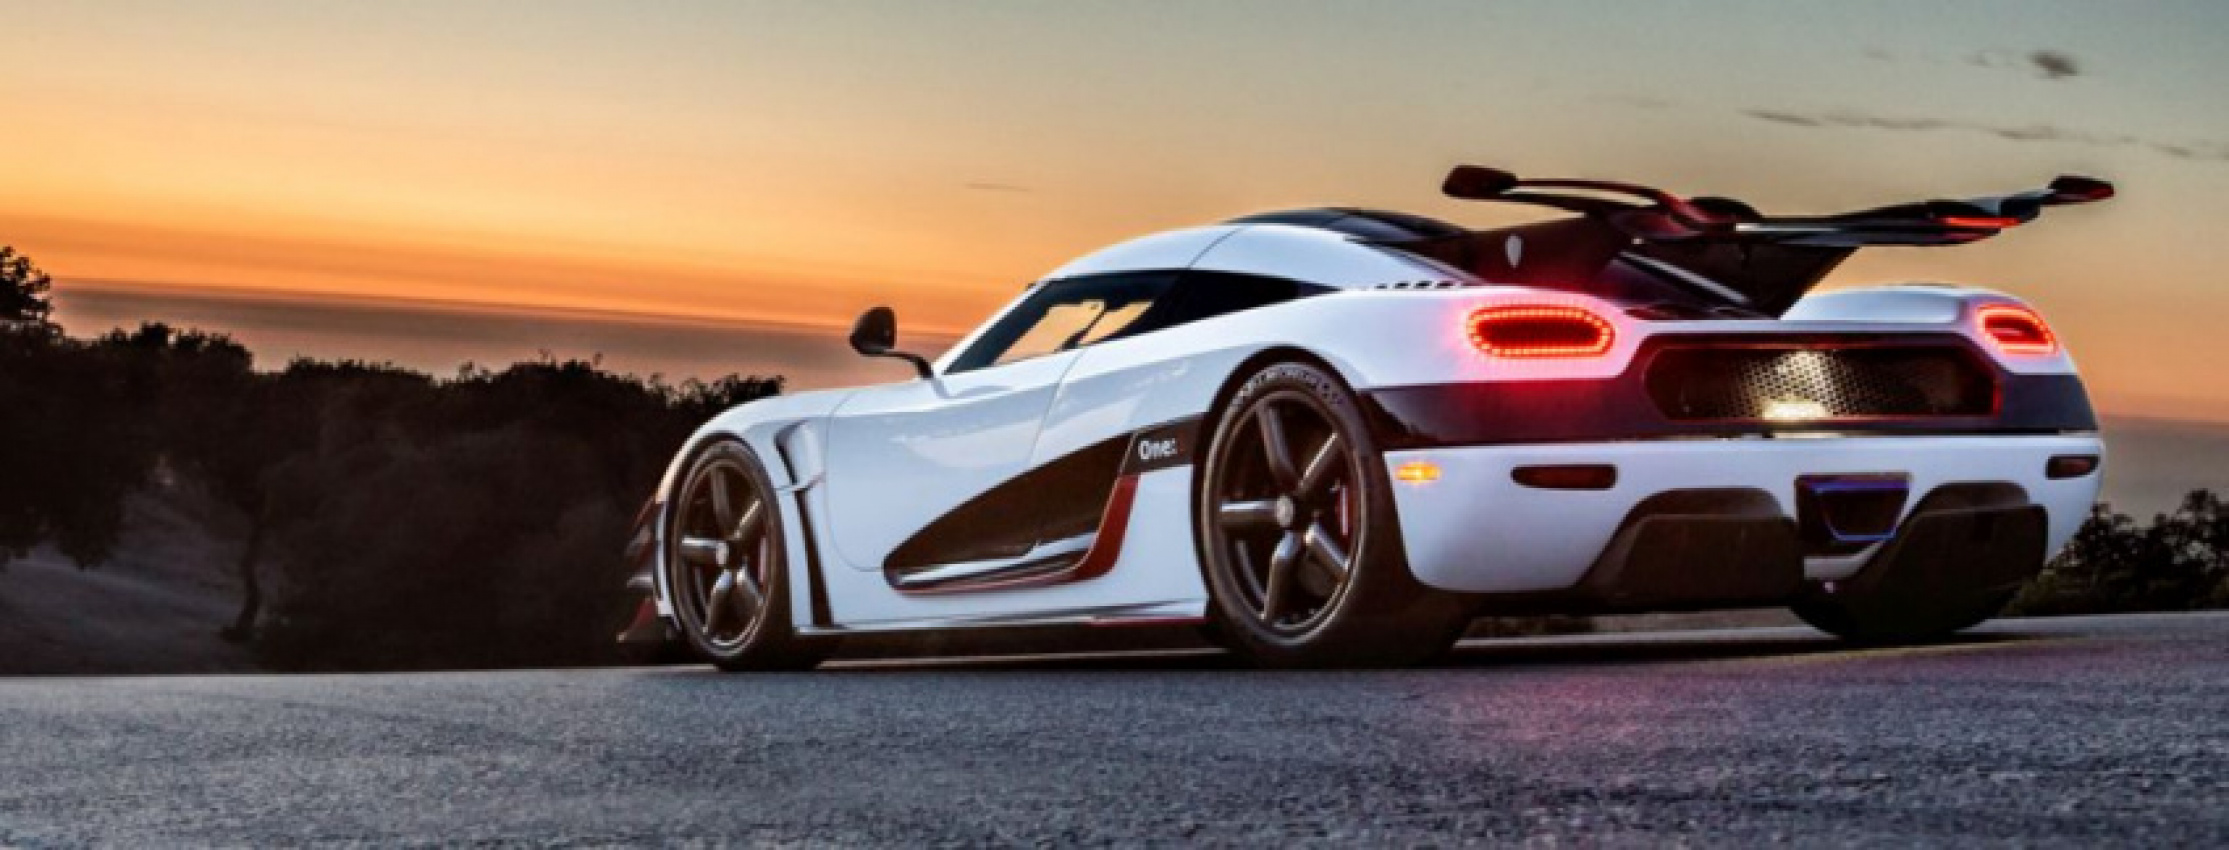 autos, cars, koenigsegg, autos koenigsegg, koenigsegg in a huff over bonhams' valuation of one:1